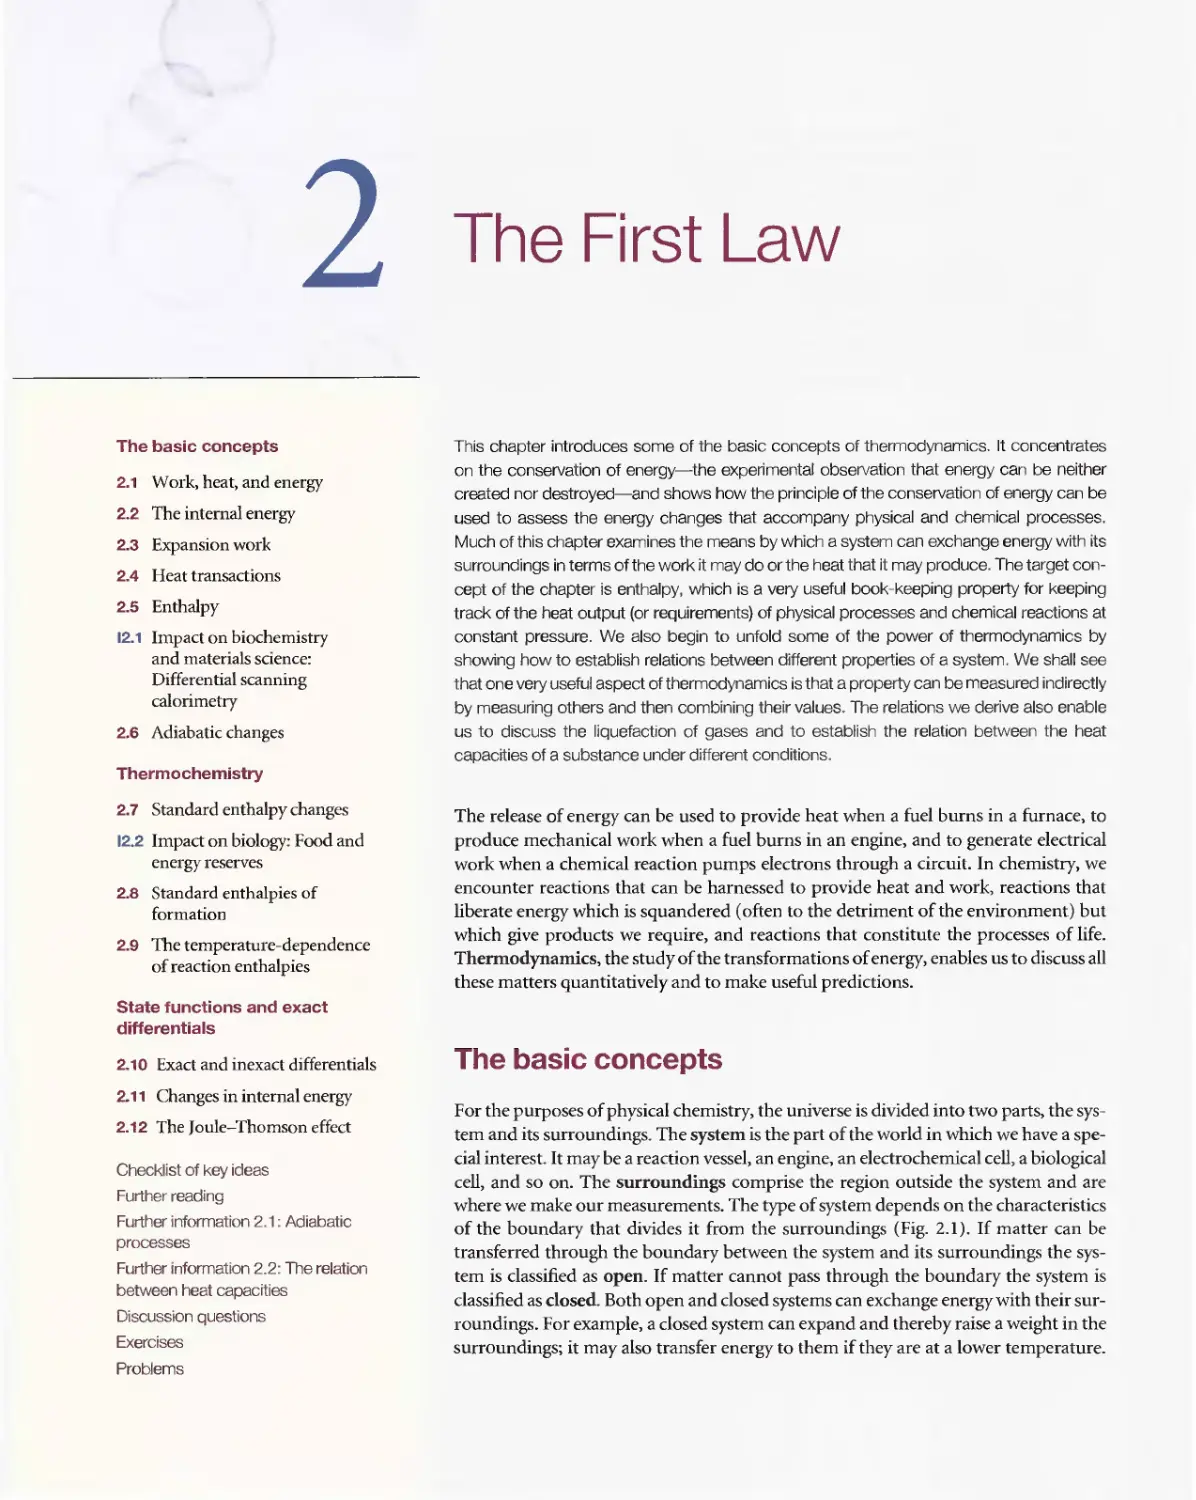 2 - The First Law